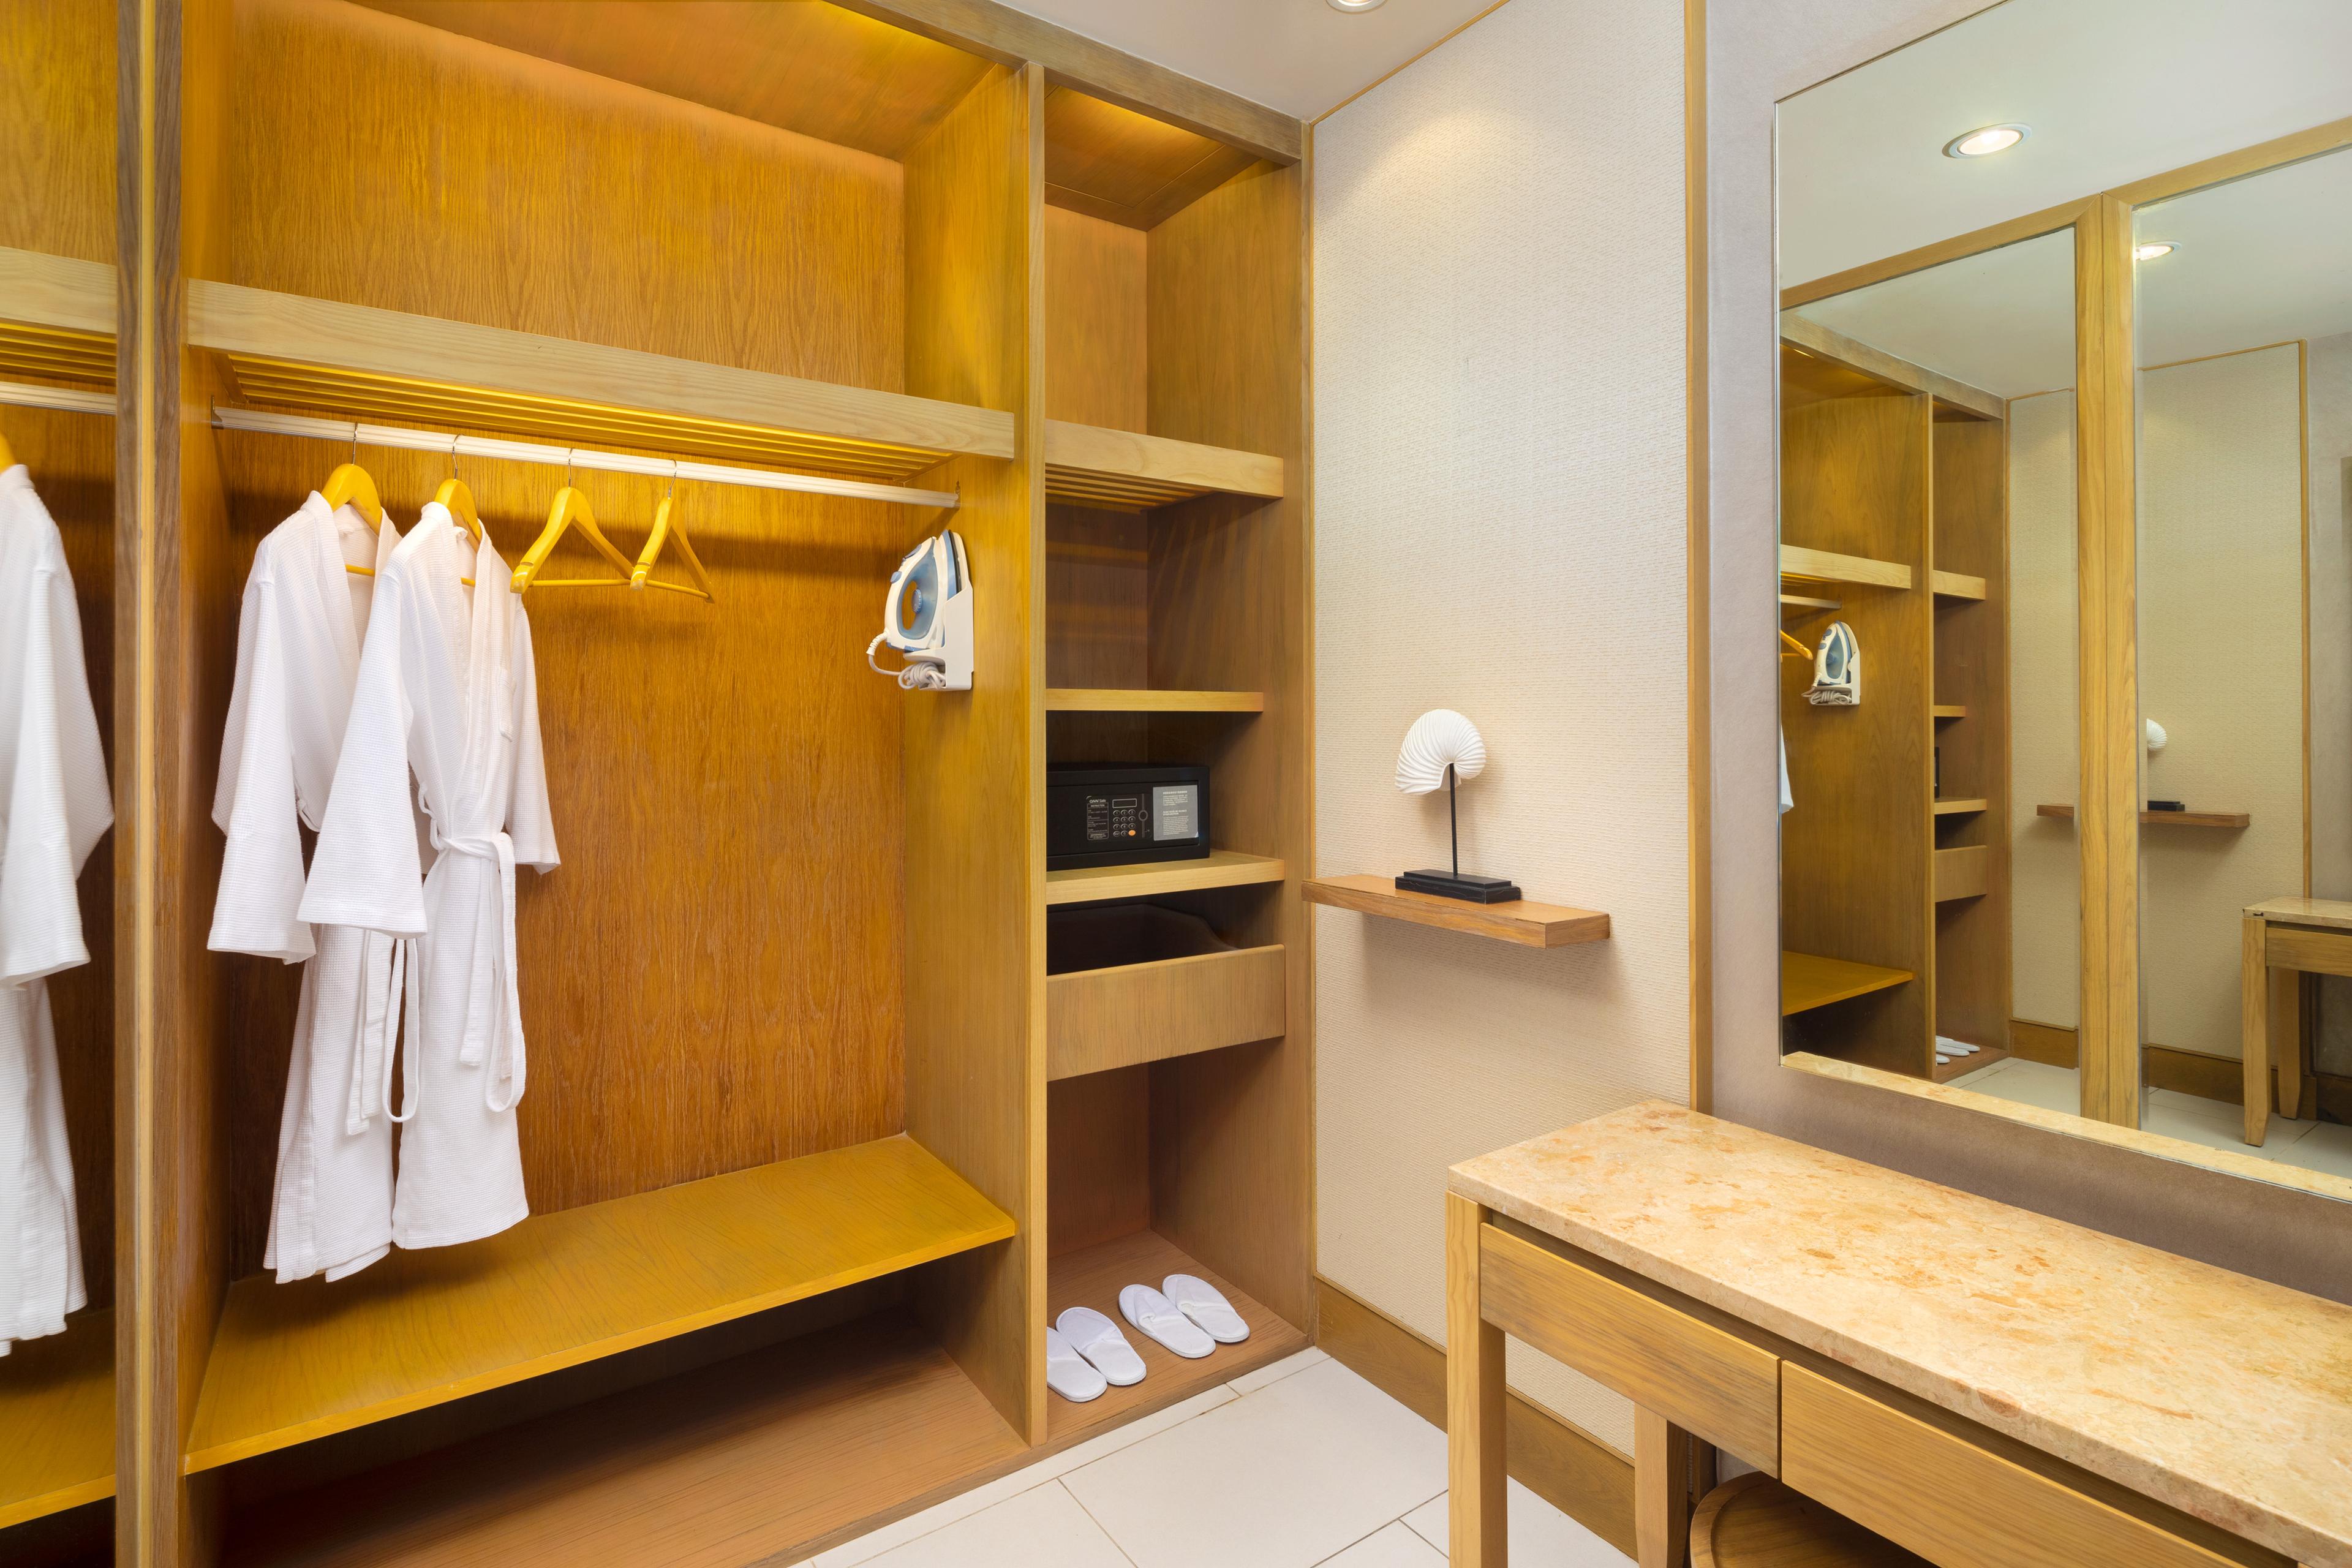 Our spacious and comfortable cloakroom are convenient for guest.